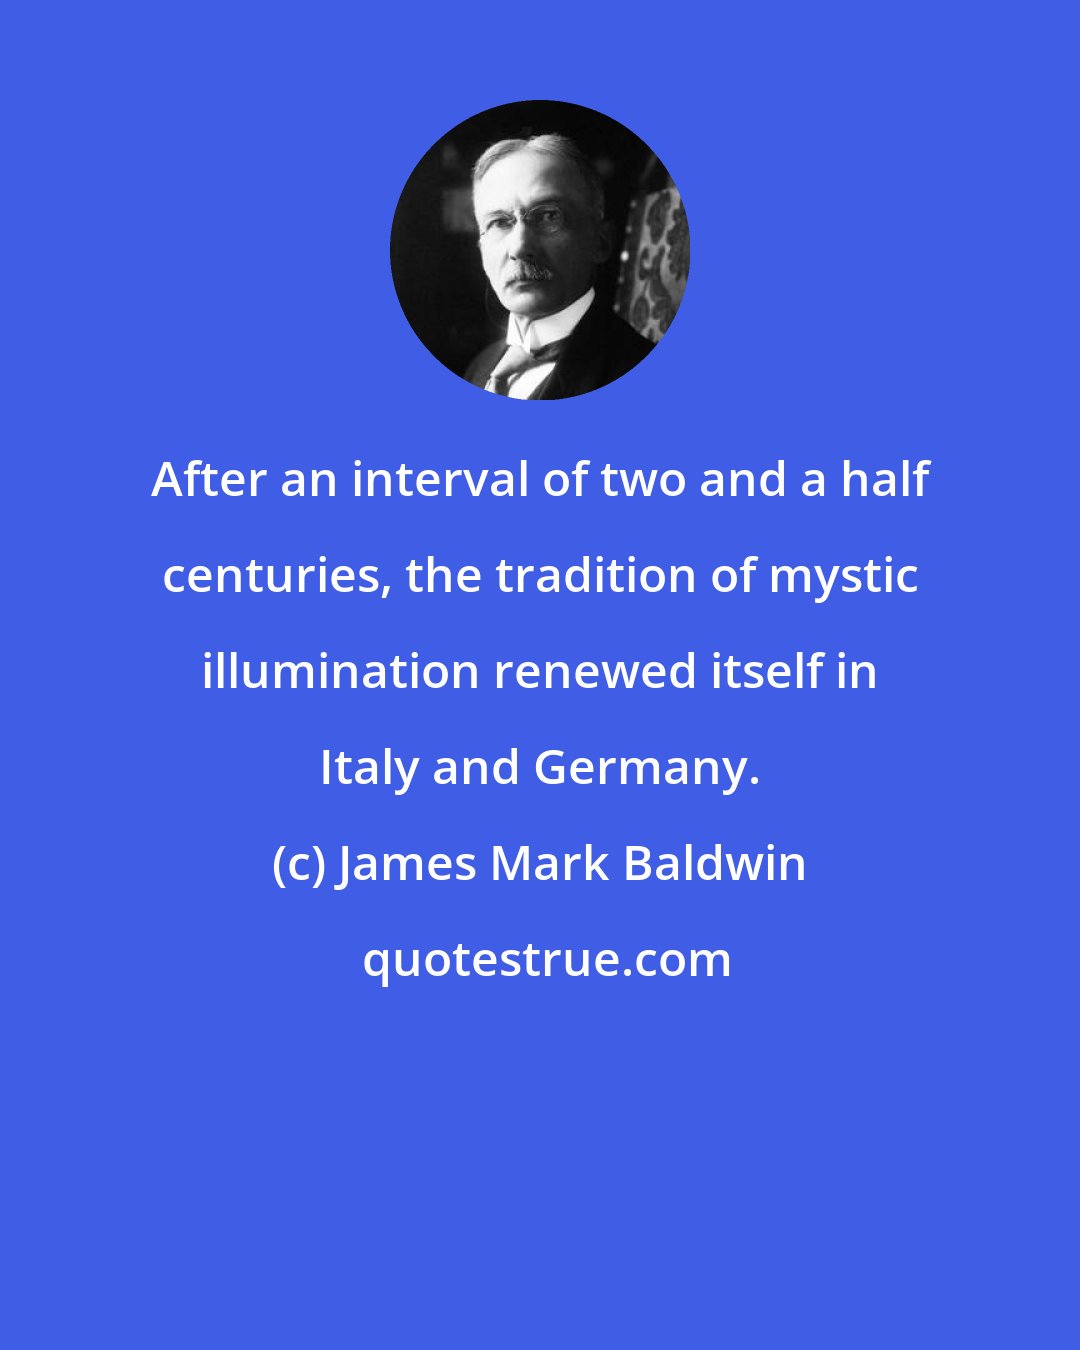 James Mark Baldwin: After an interval of two and a half centuries, the tradition of mystic illumination renewed itself in Italy and Germany.